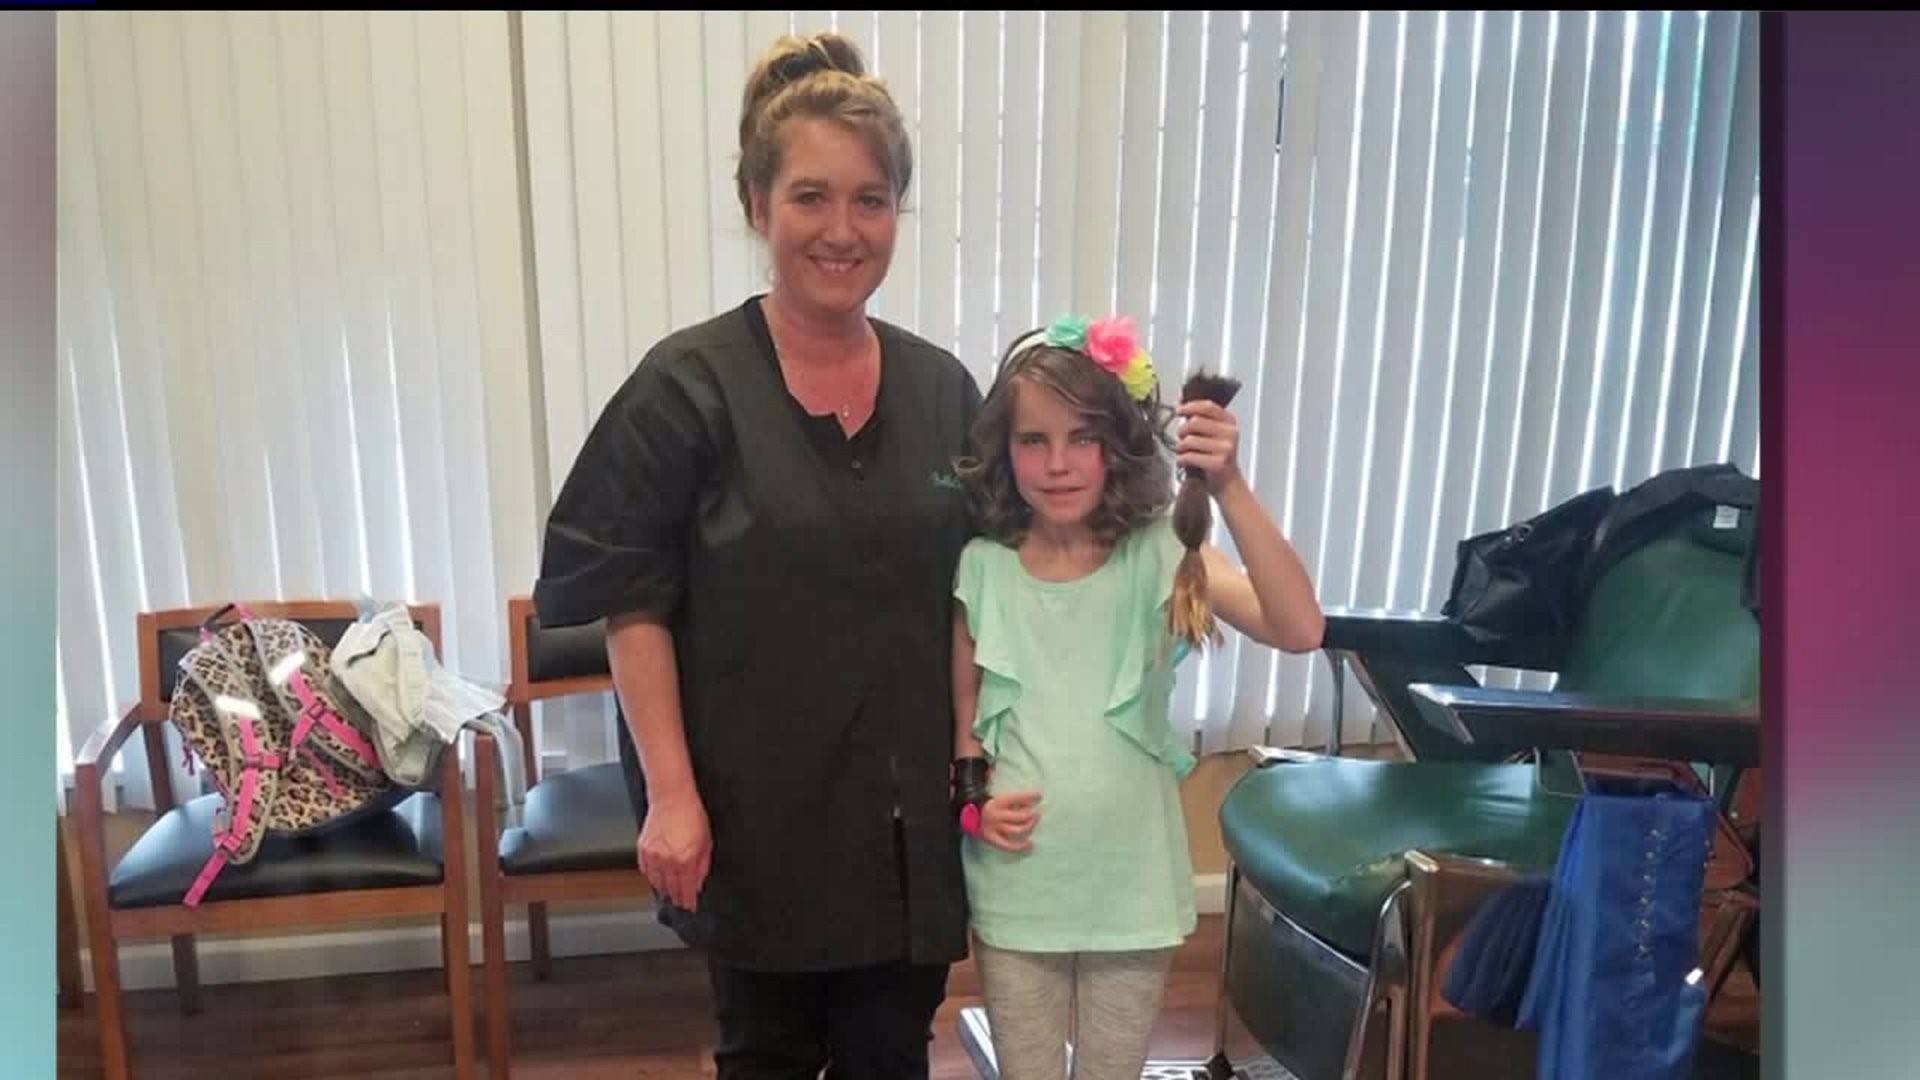 Young girl with disabilities, donates hair to help others fighting their own battles